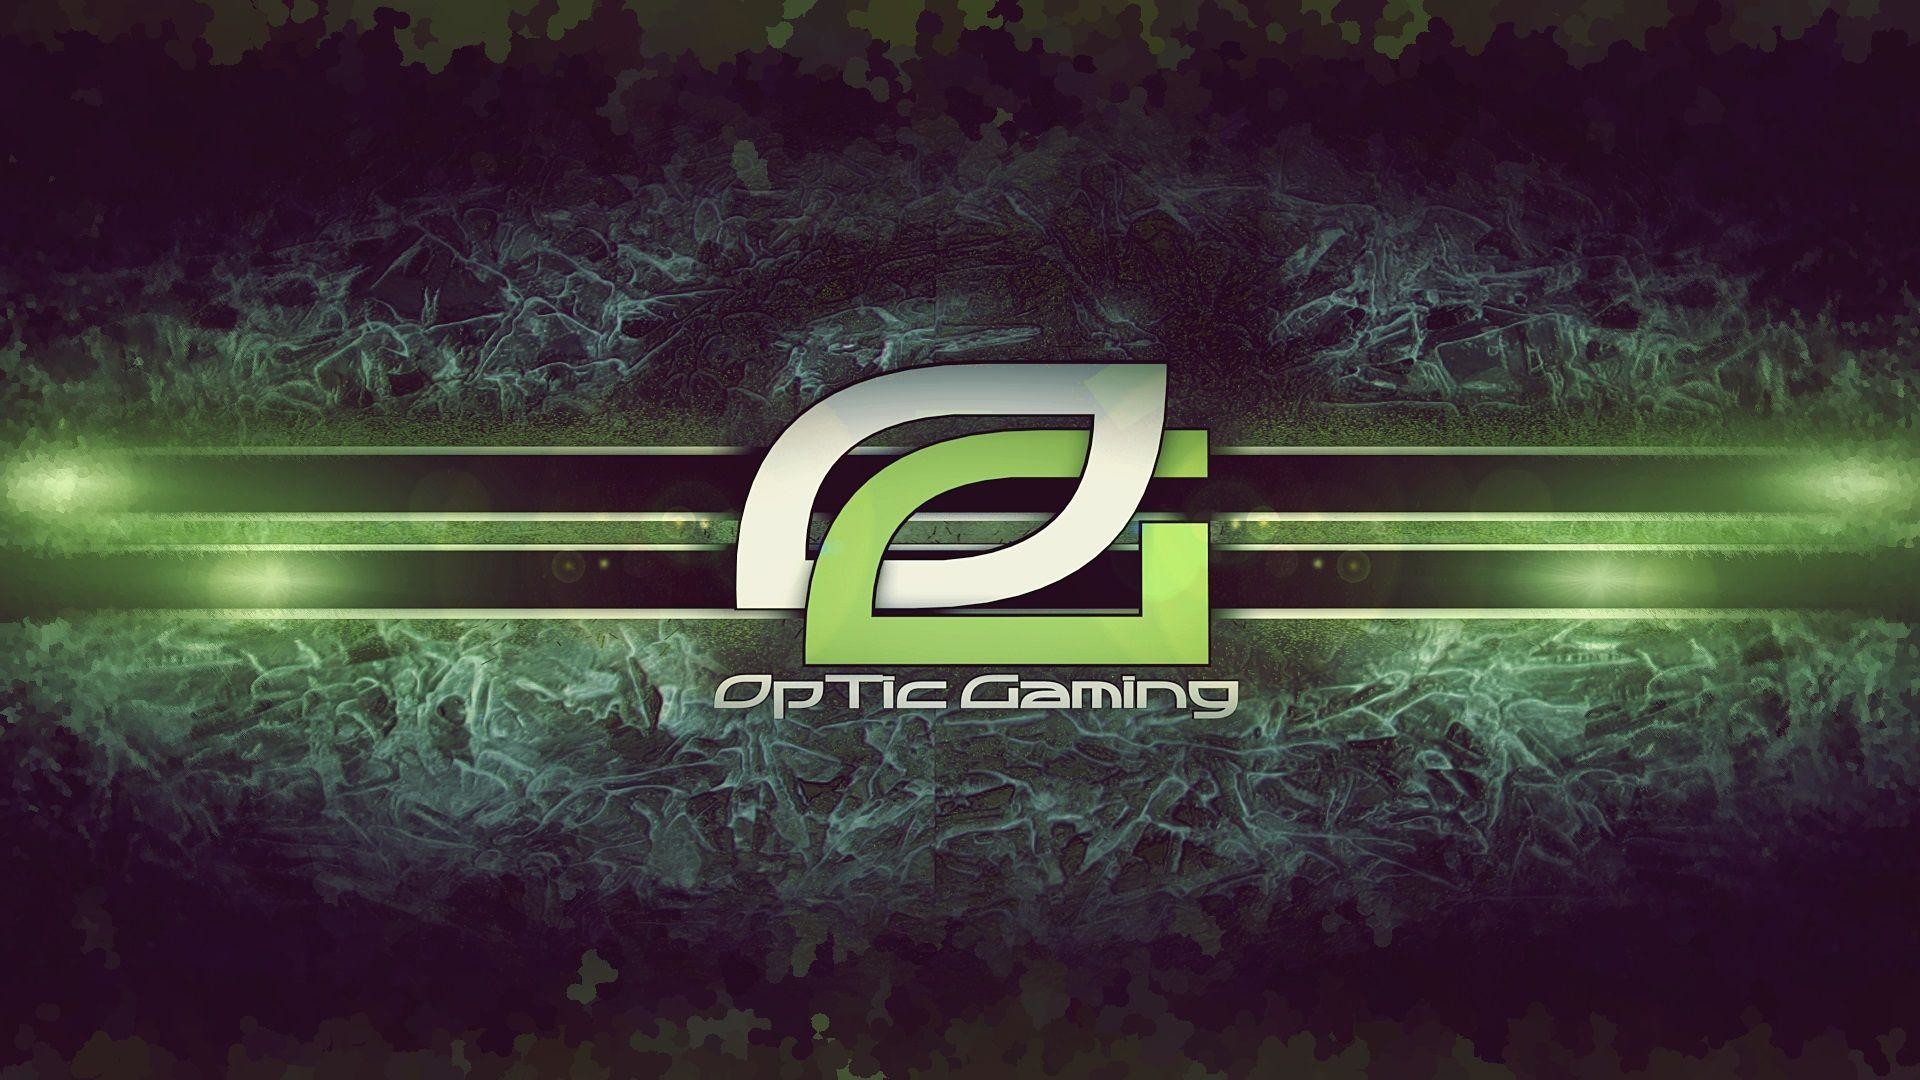 Optic Gaming Backgrounds | Wallpapers, Backgrounds, Images, Art ..